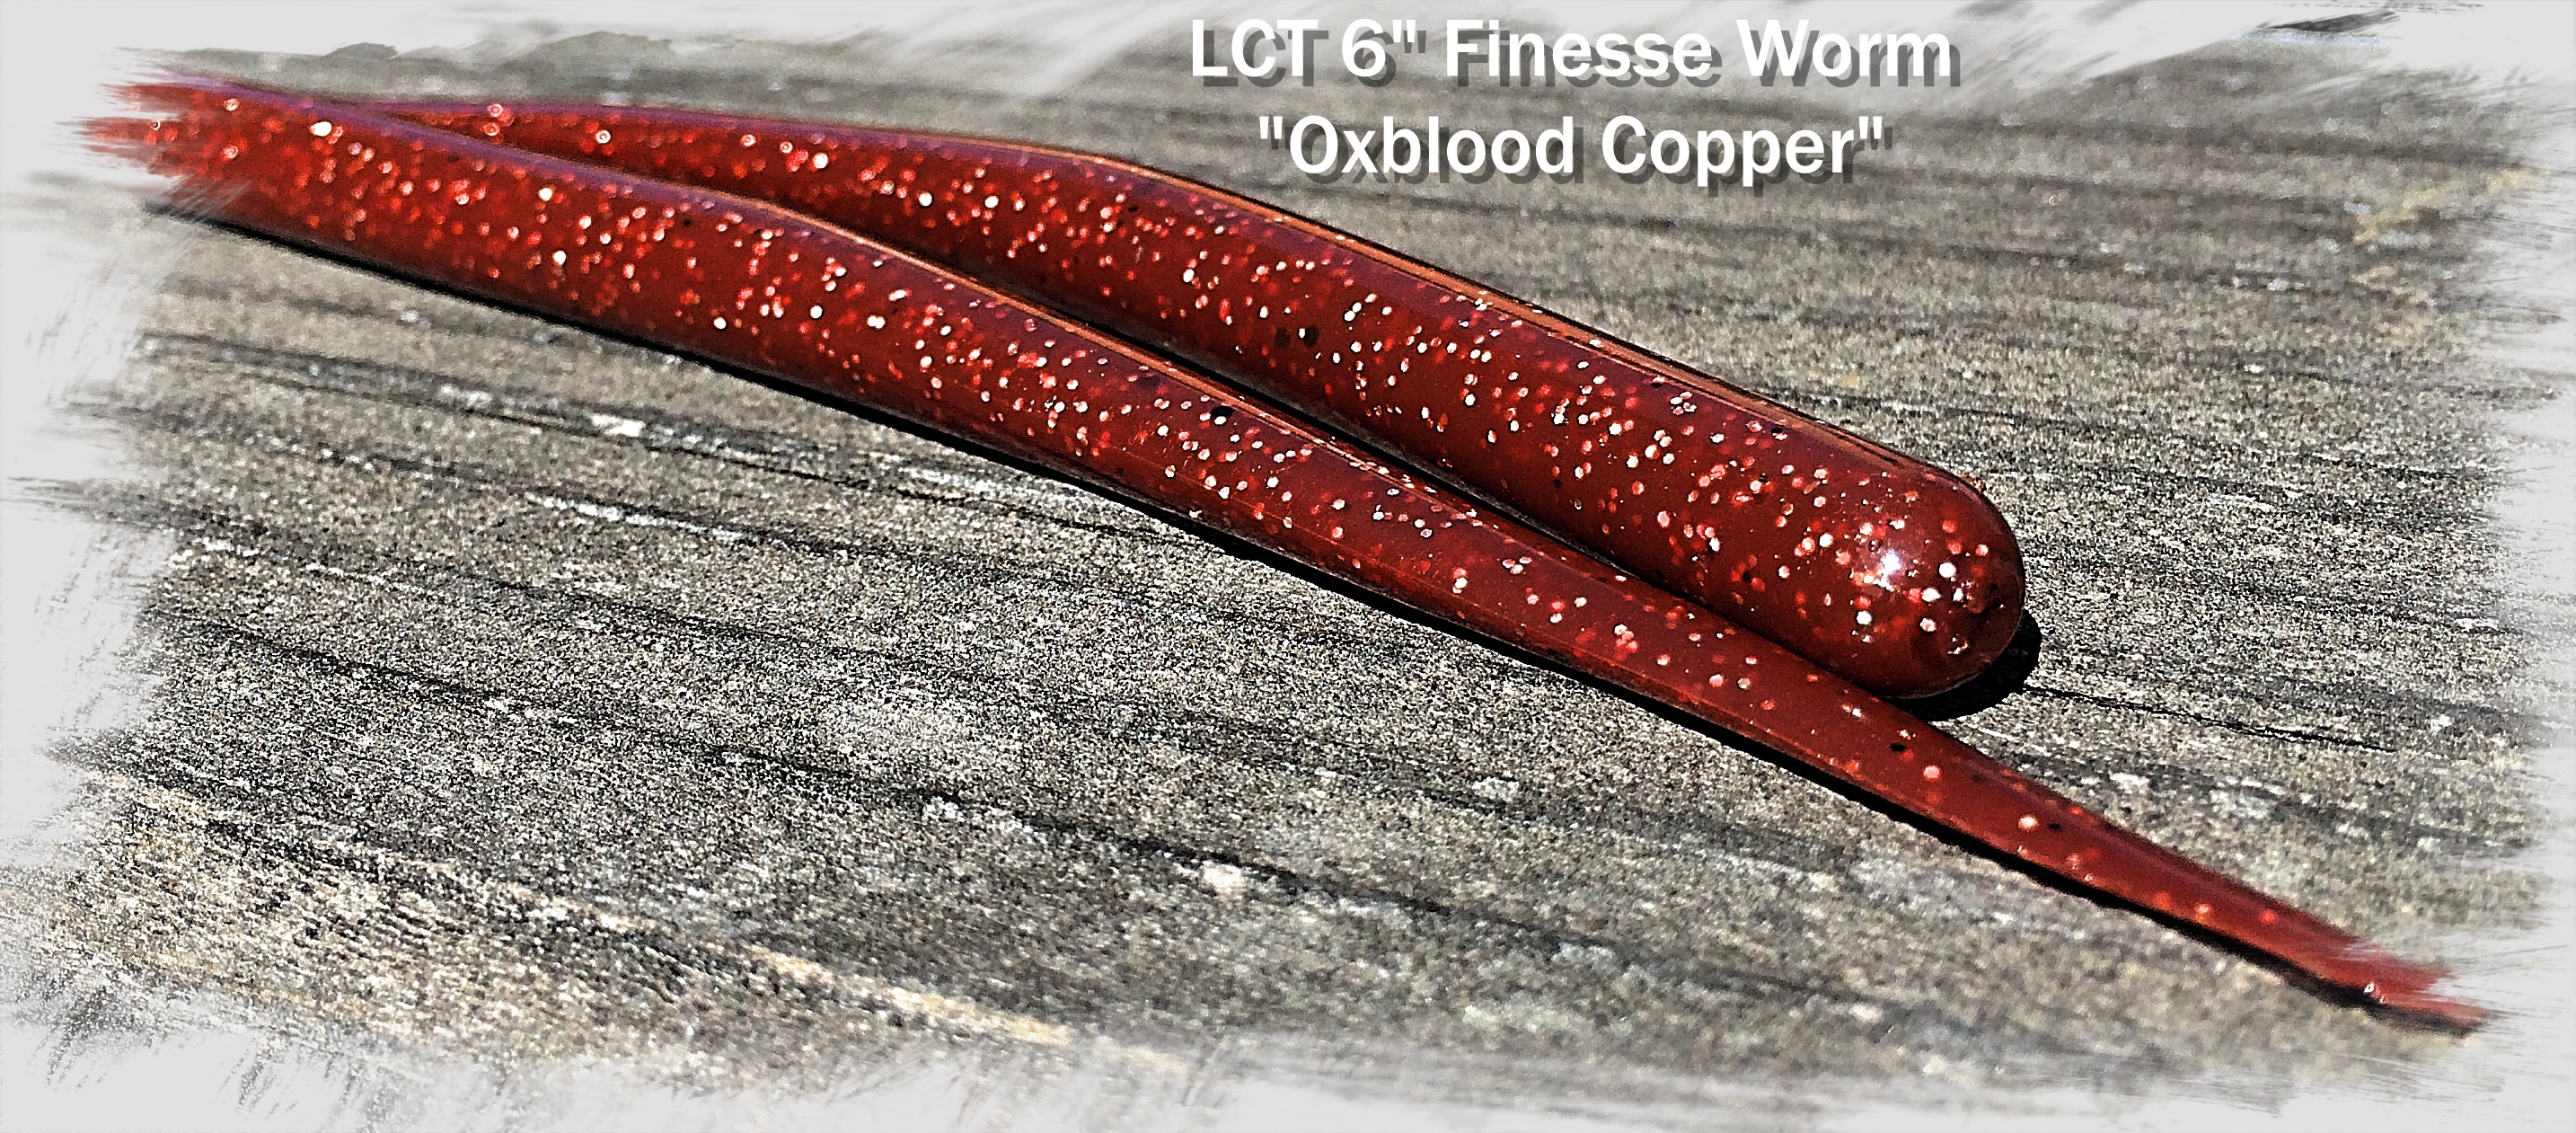 https://legacycustomtackle.com/wp-content/uploads/2017/04/LCT-6.0-Finesse-Worm-Oxblood-Copper-2868x1261.jpg